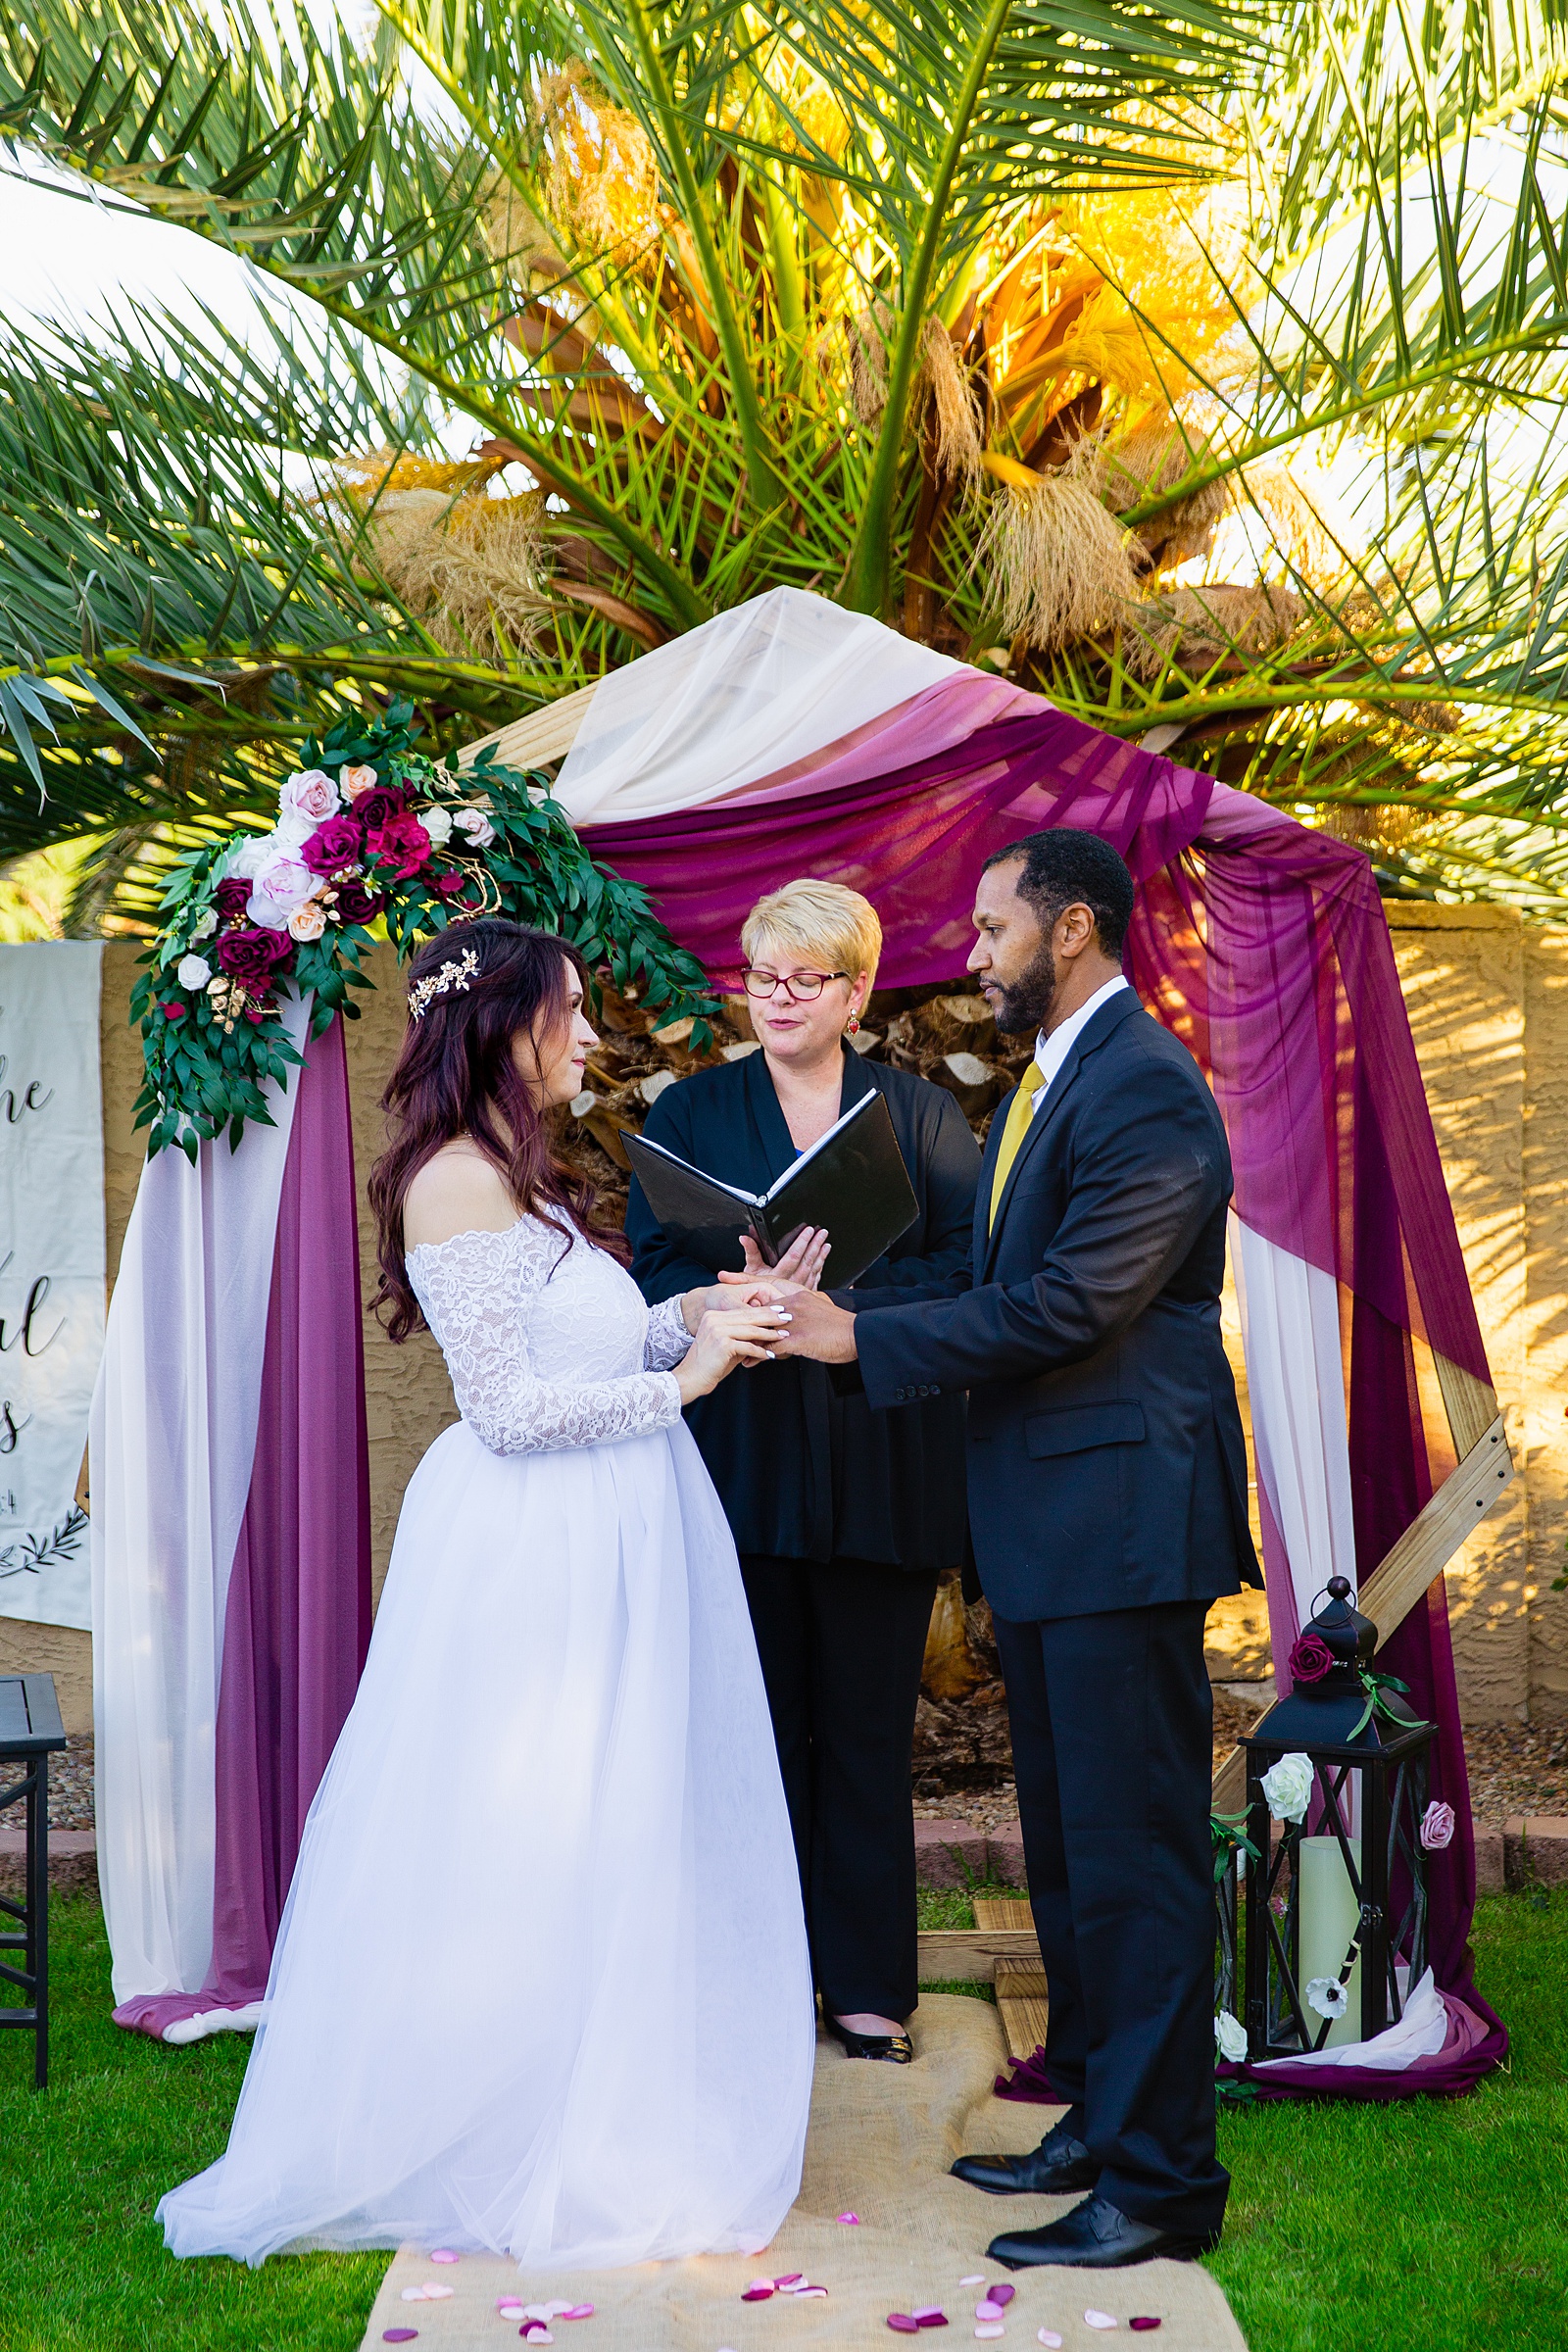 Bride and groom exchange rings during their wedding ceremony at Backyard Micro by Phoenix wedding photographer PMA Photography.